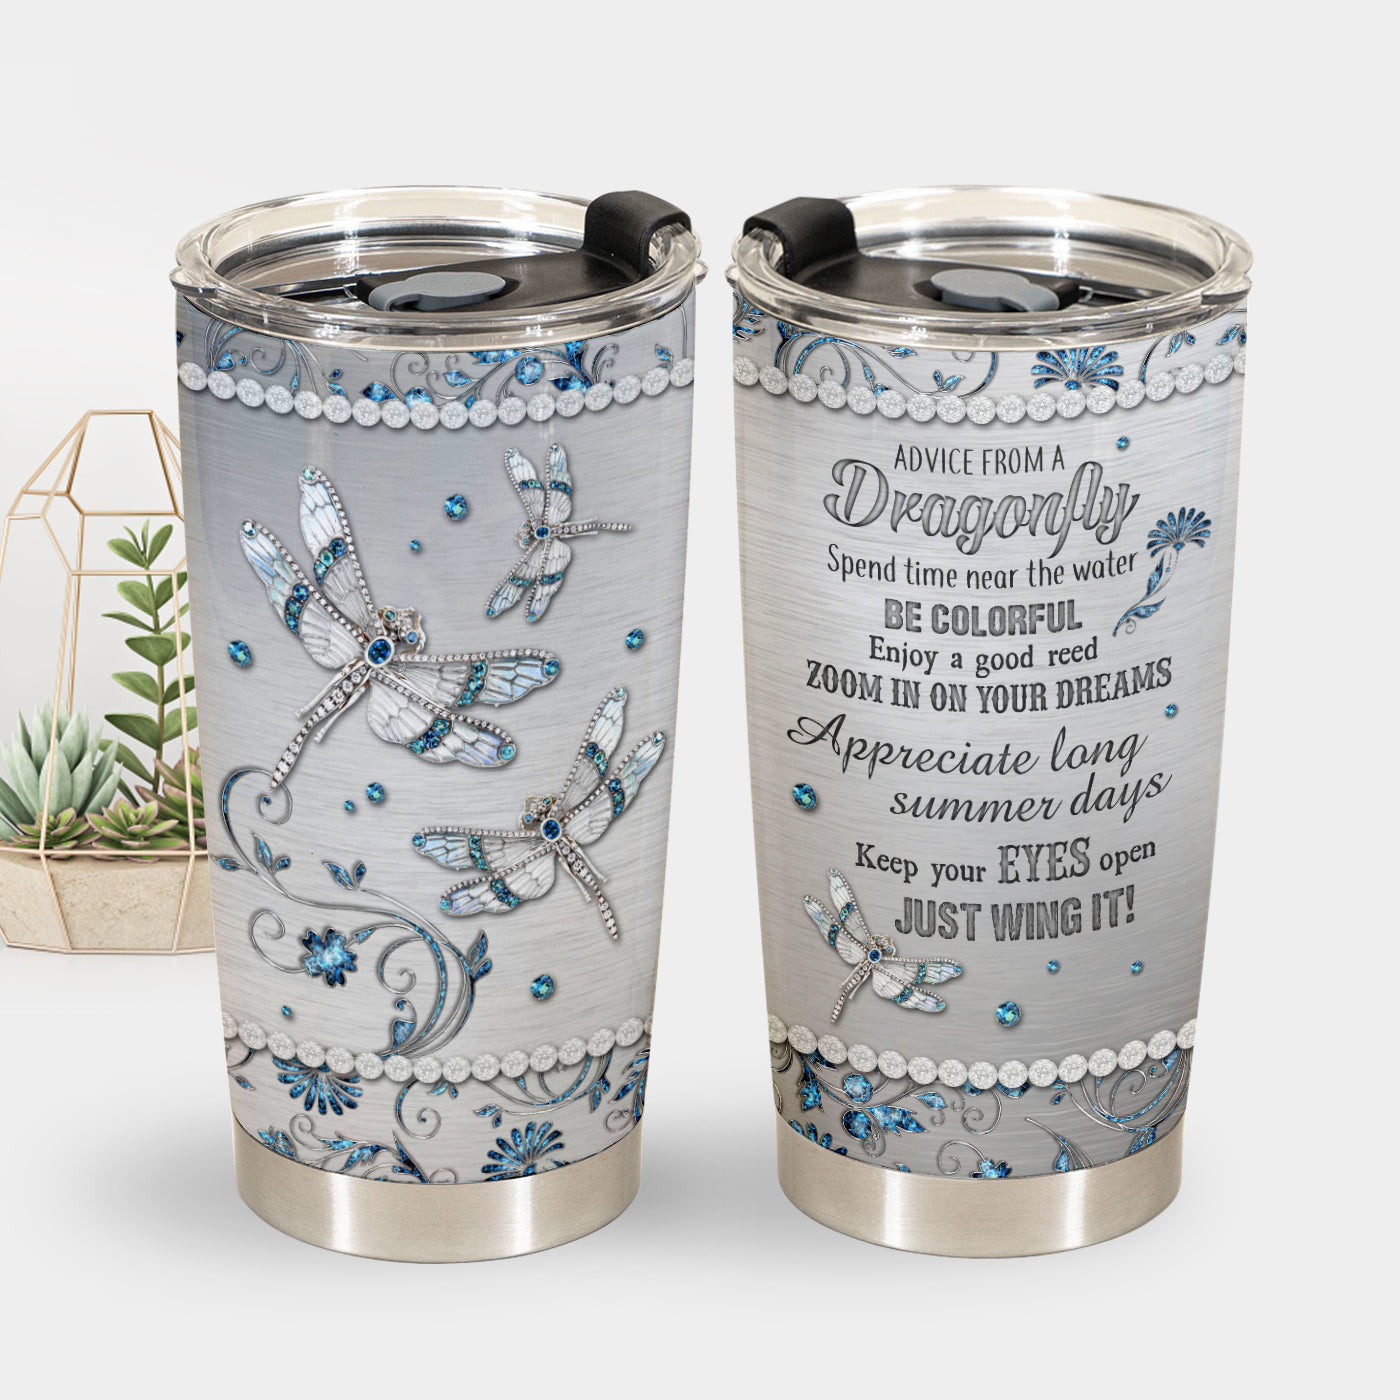 Best Custom Dragonfly Gift for Women - Boho Gifts for Women With Positive Inspirational Quote - Motivational, Religious, Spiritual, Inspirational 20oz Stainless Steel Tumbler Gifts for Women + 1666689595510.jpg